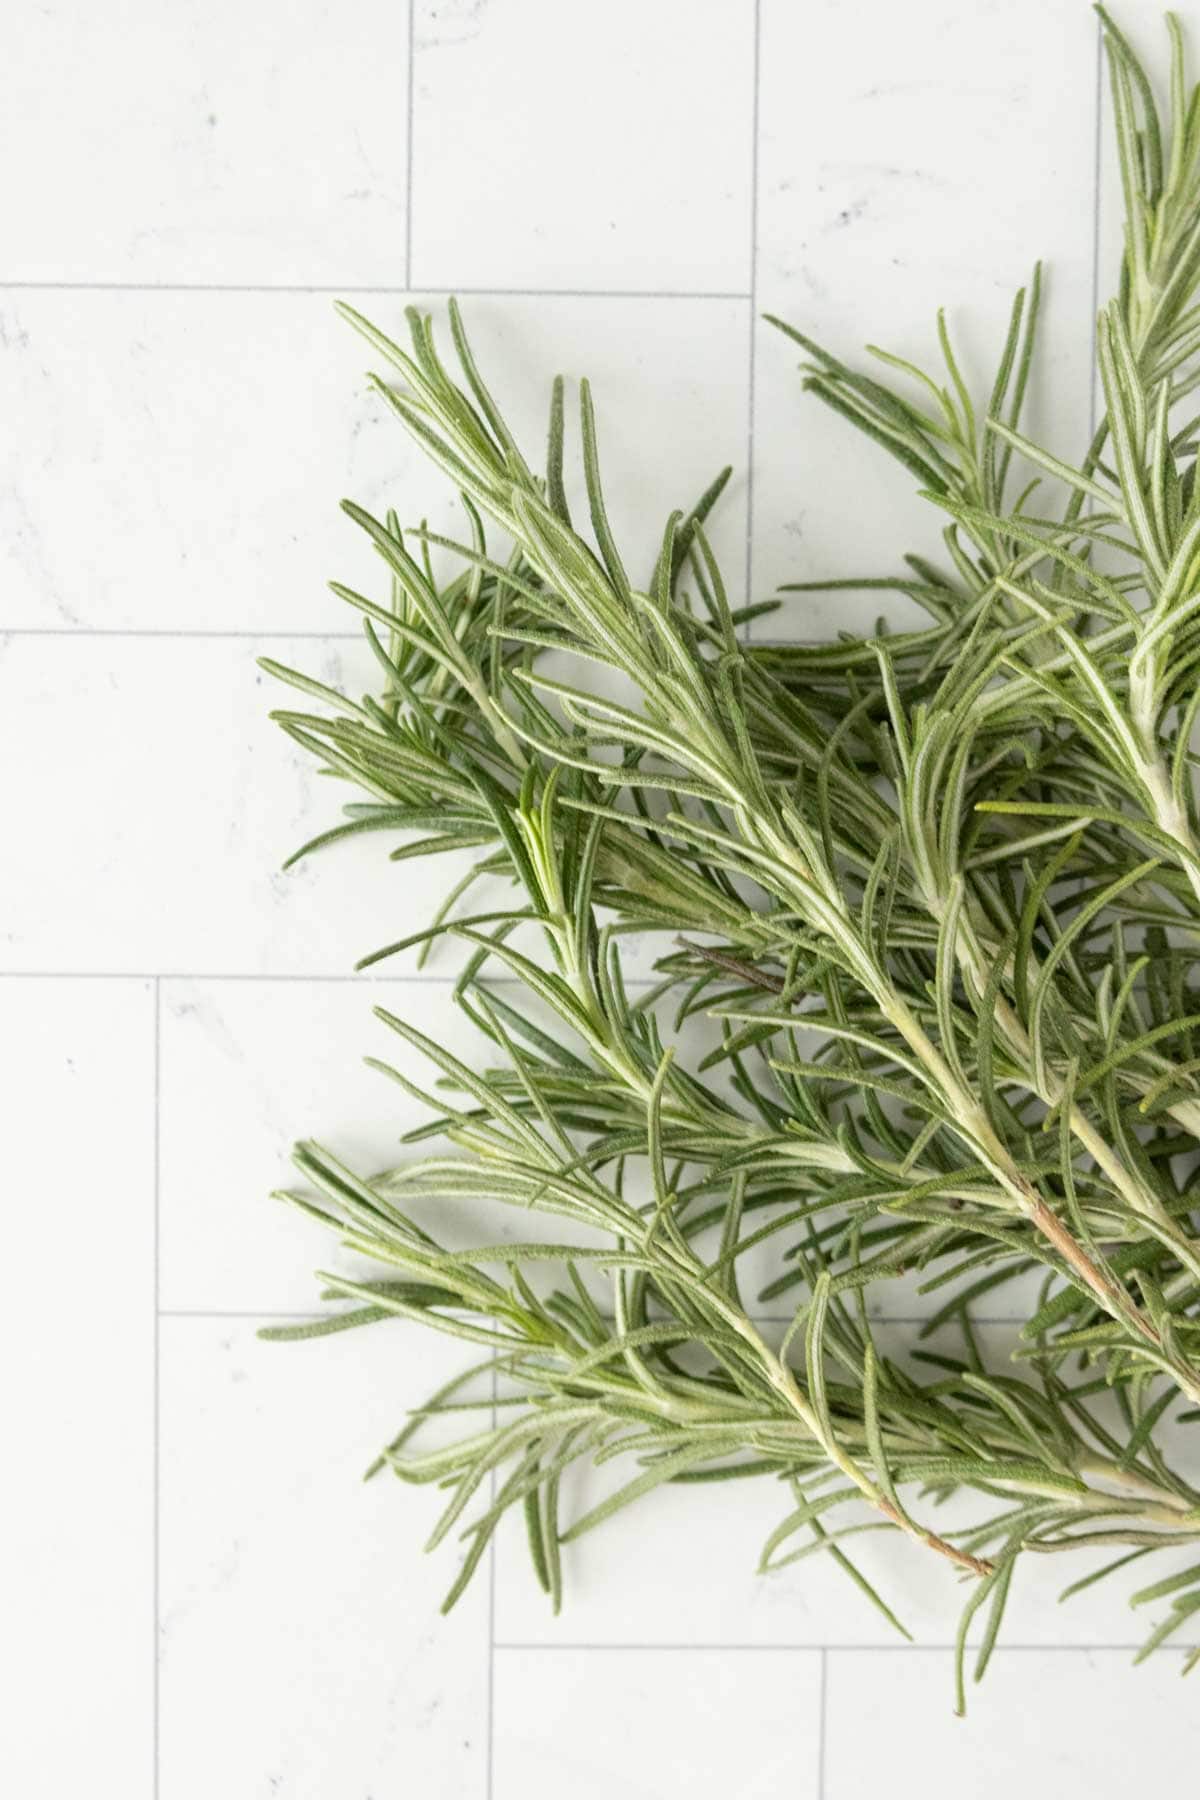 How to Dry Rosemary